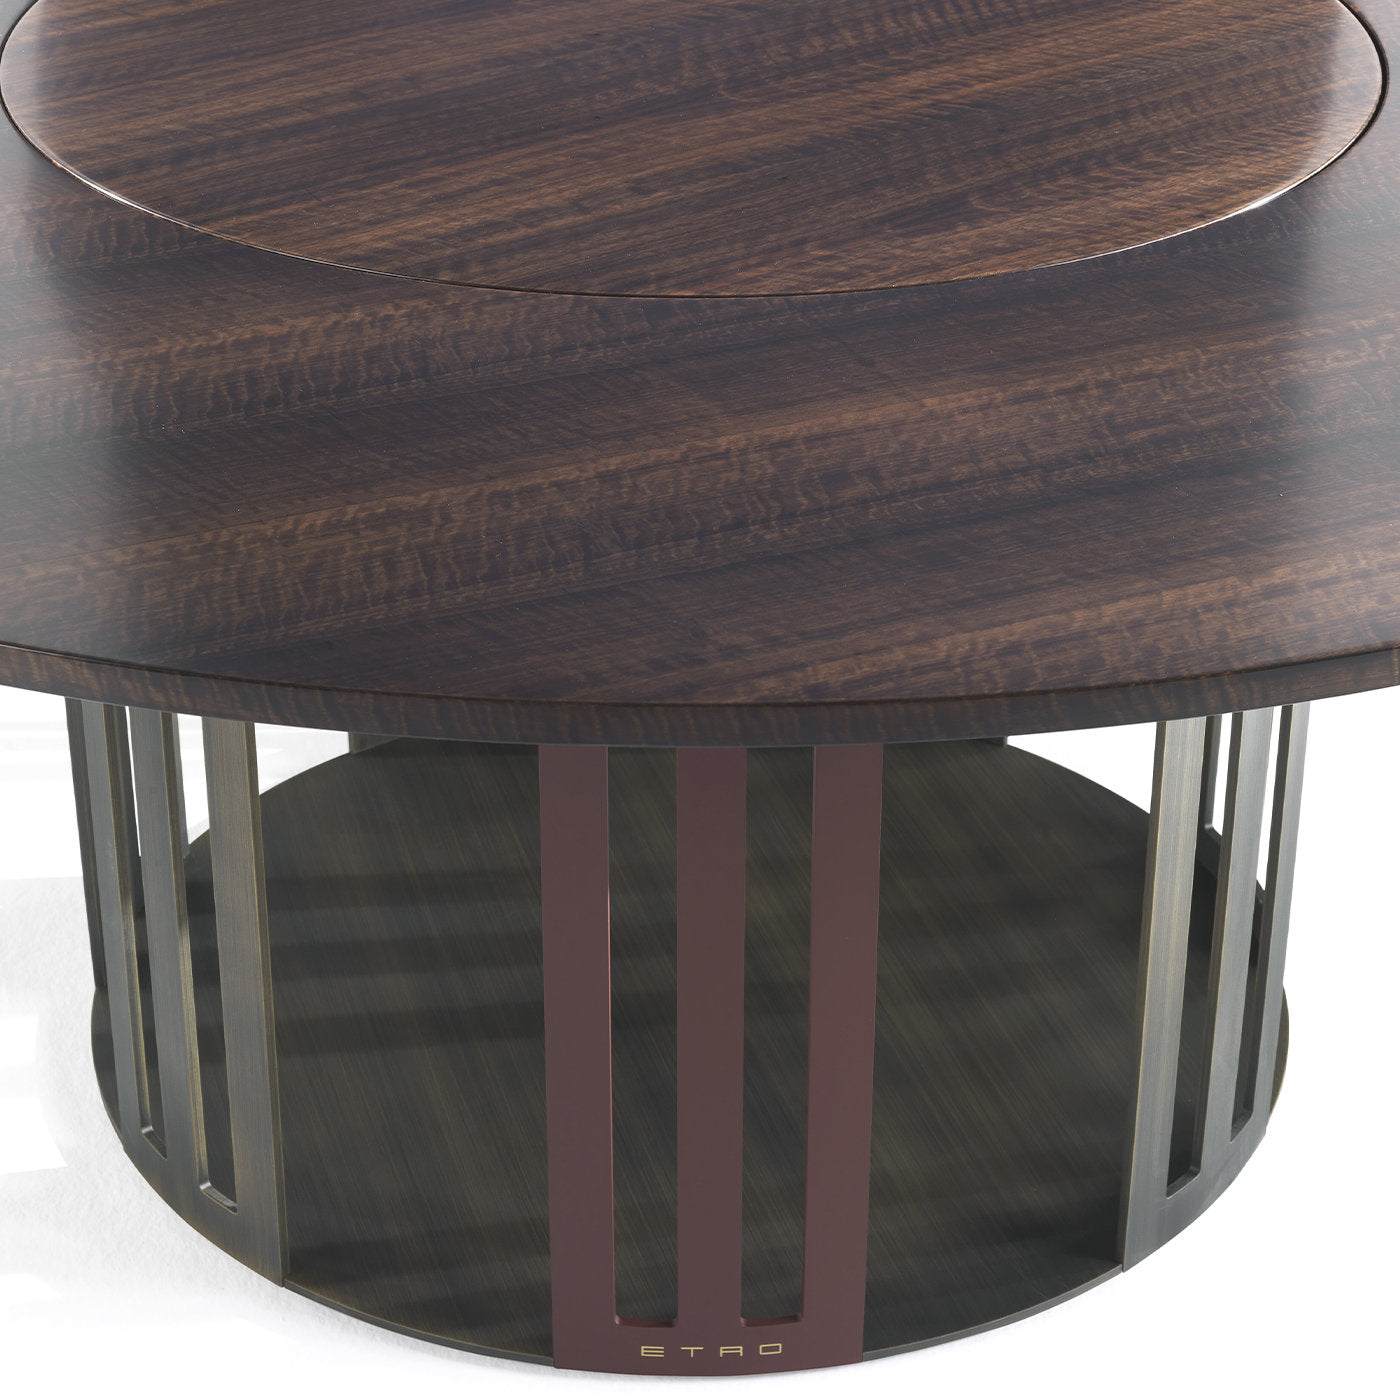 Klee Round Dining Table with Lazy Susan - Alternative view 3